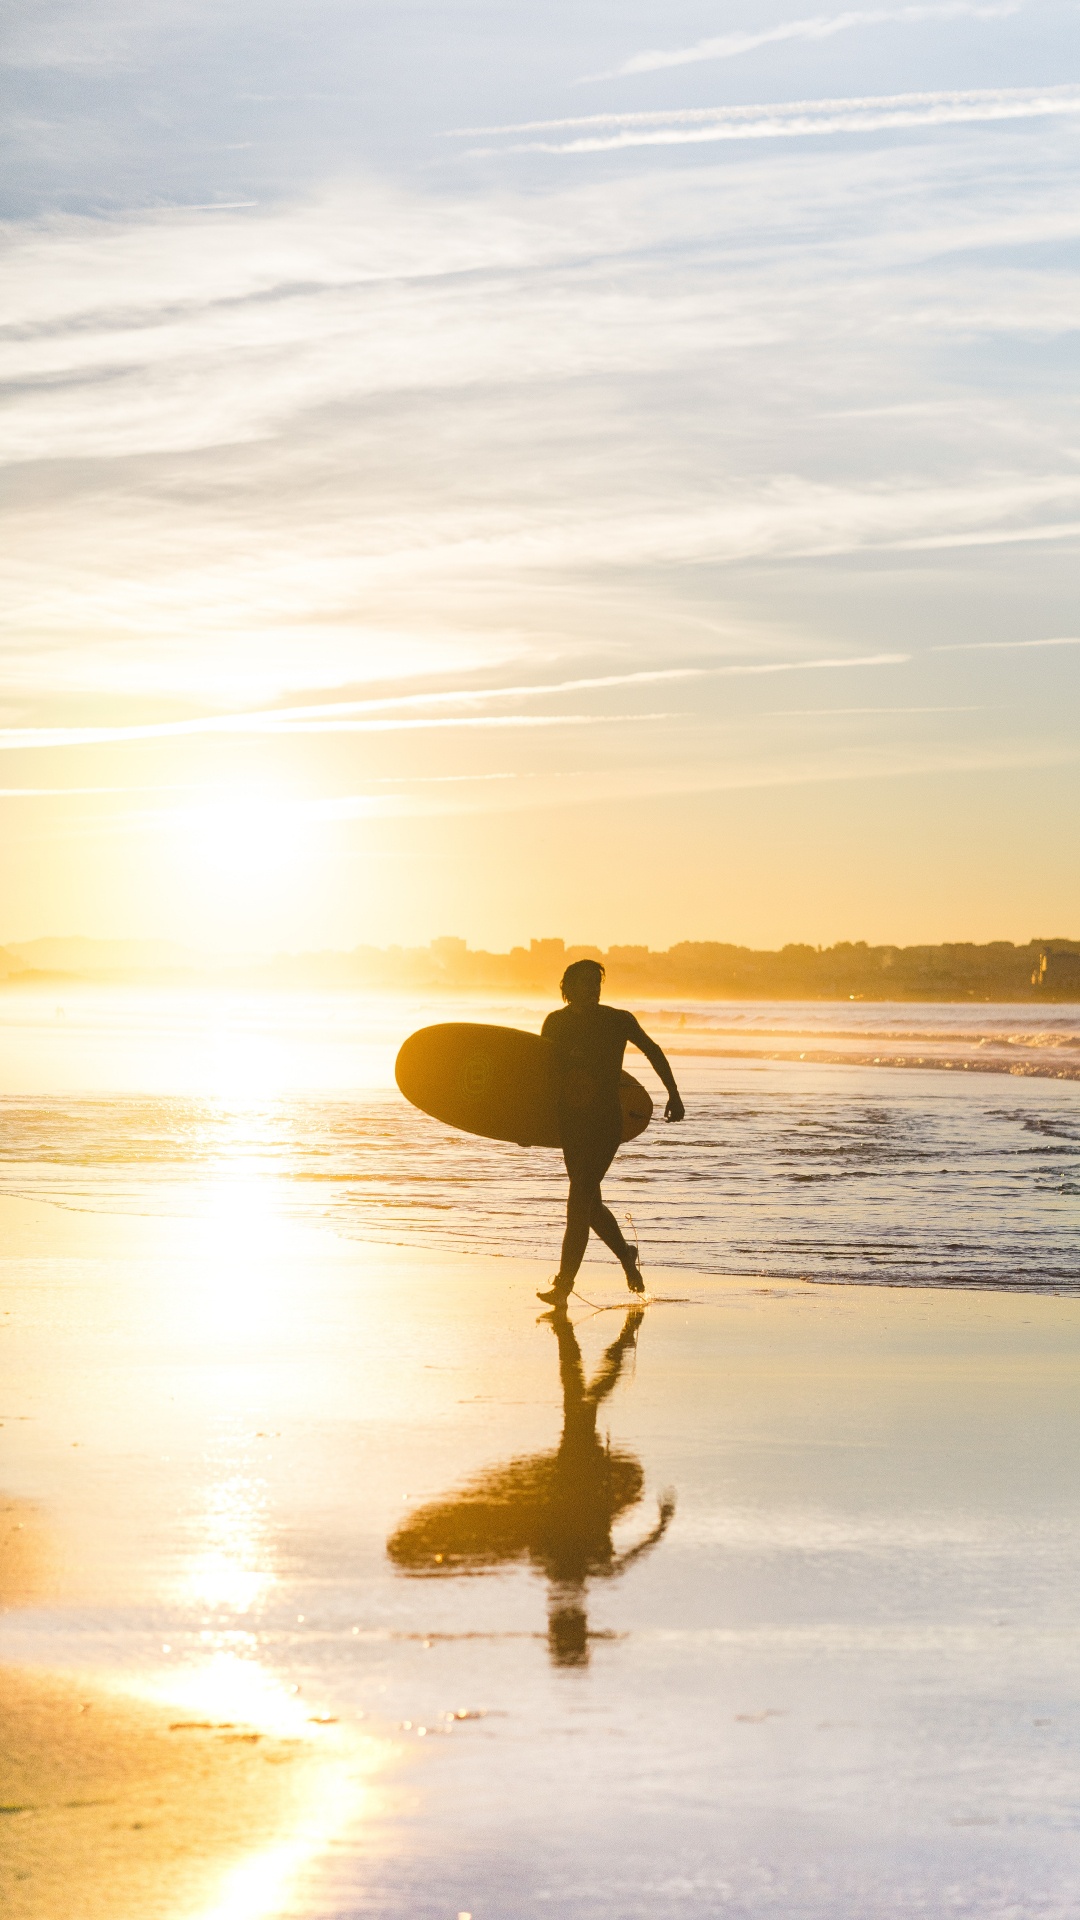 Man in Black Shorts Holding Surfboard Walking on Seashore During Sunset. Wallpaper in 1080x1920 Resolution